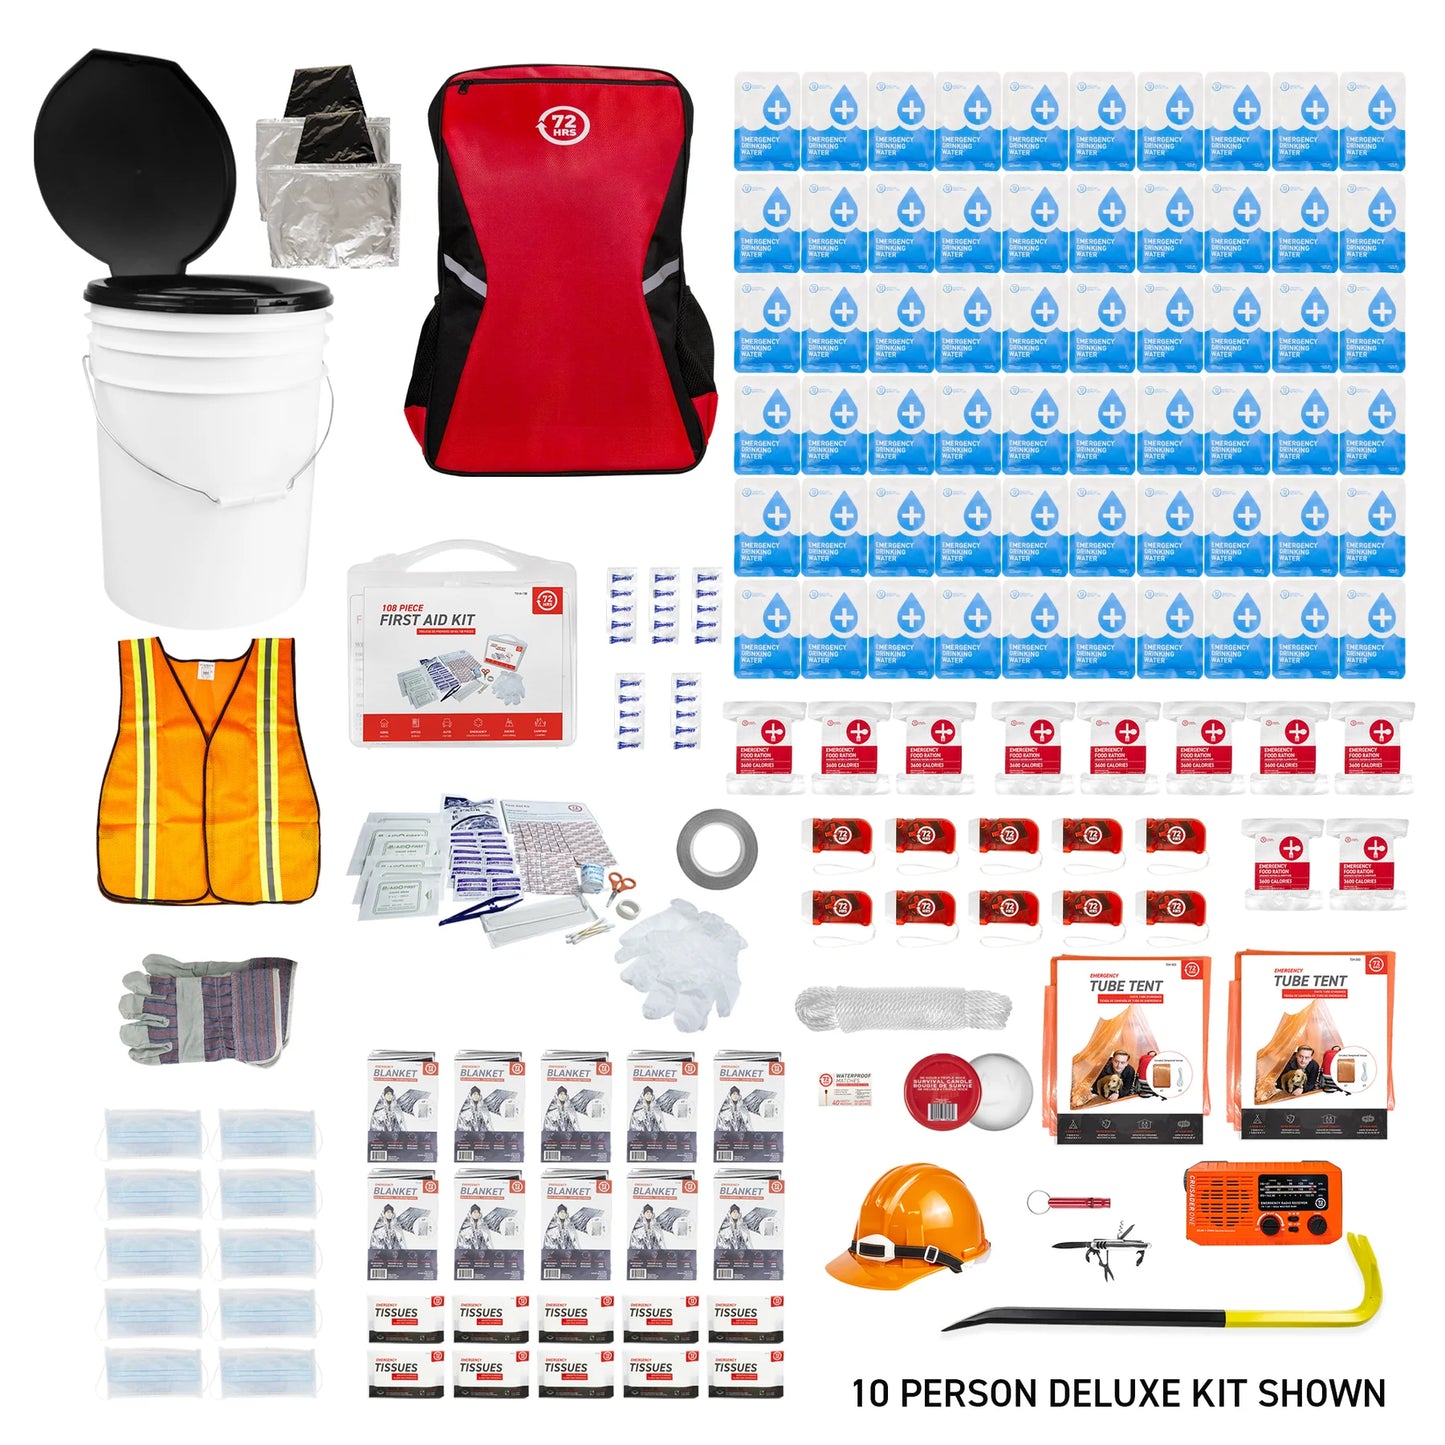 100 Person Deluxe Group Kit